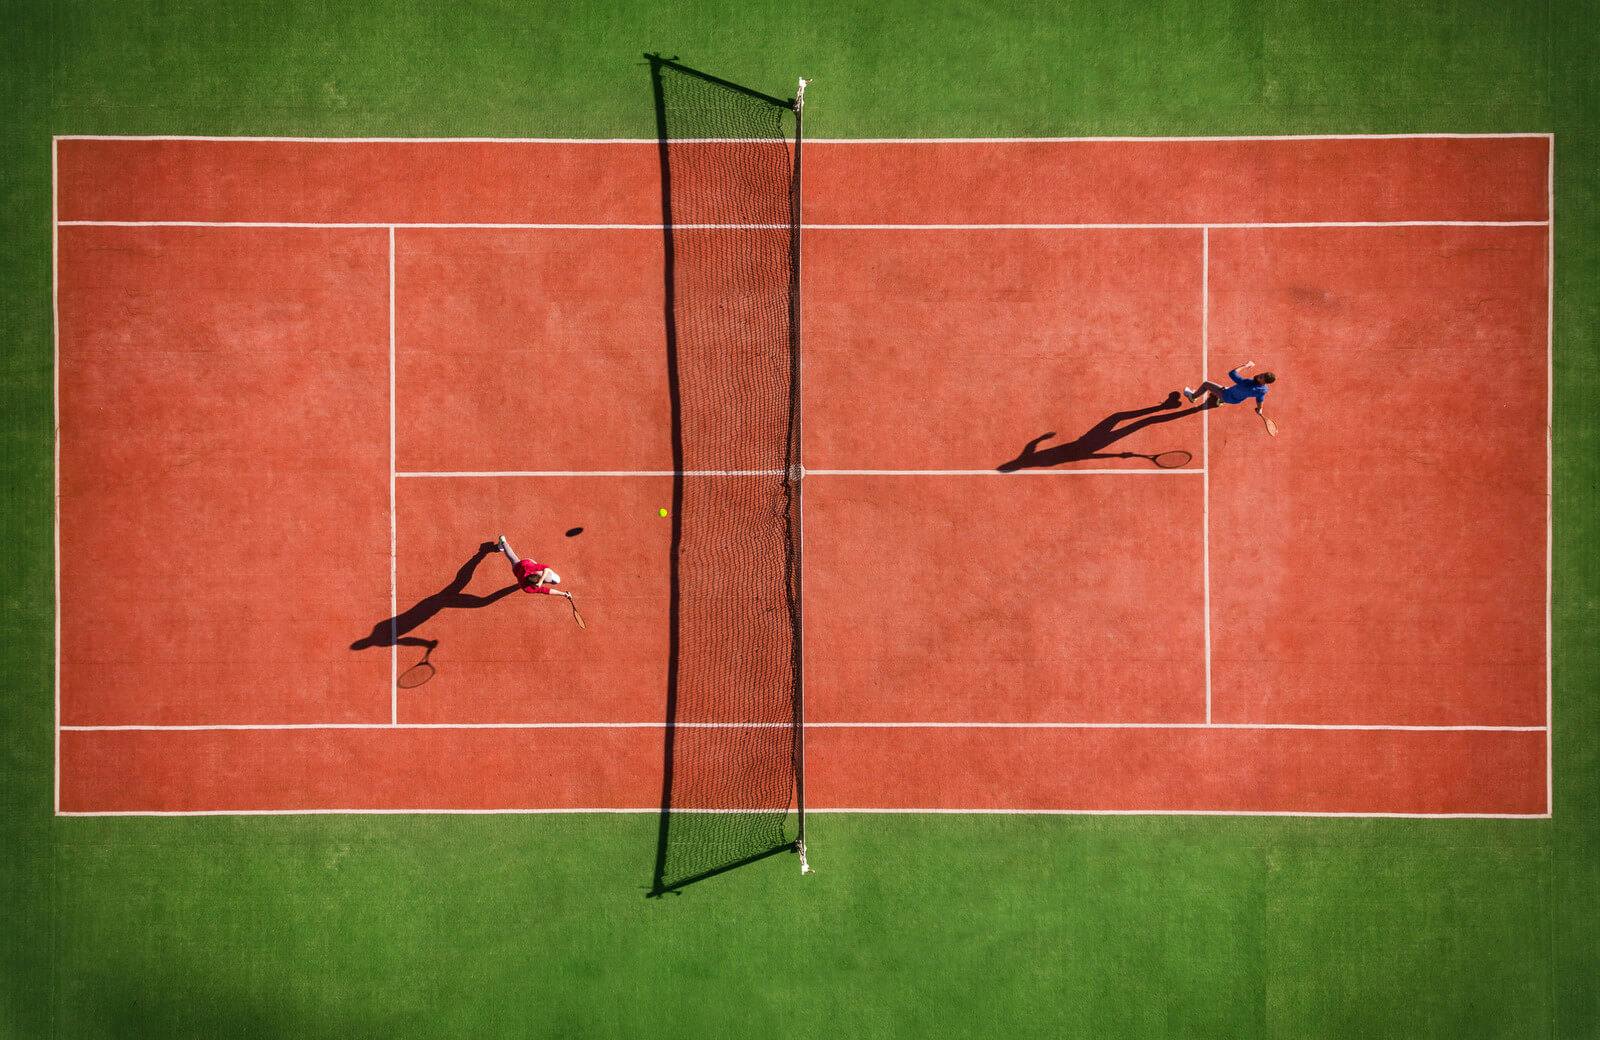 Ariel view of two people playing tennis on a ground covered course